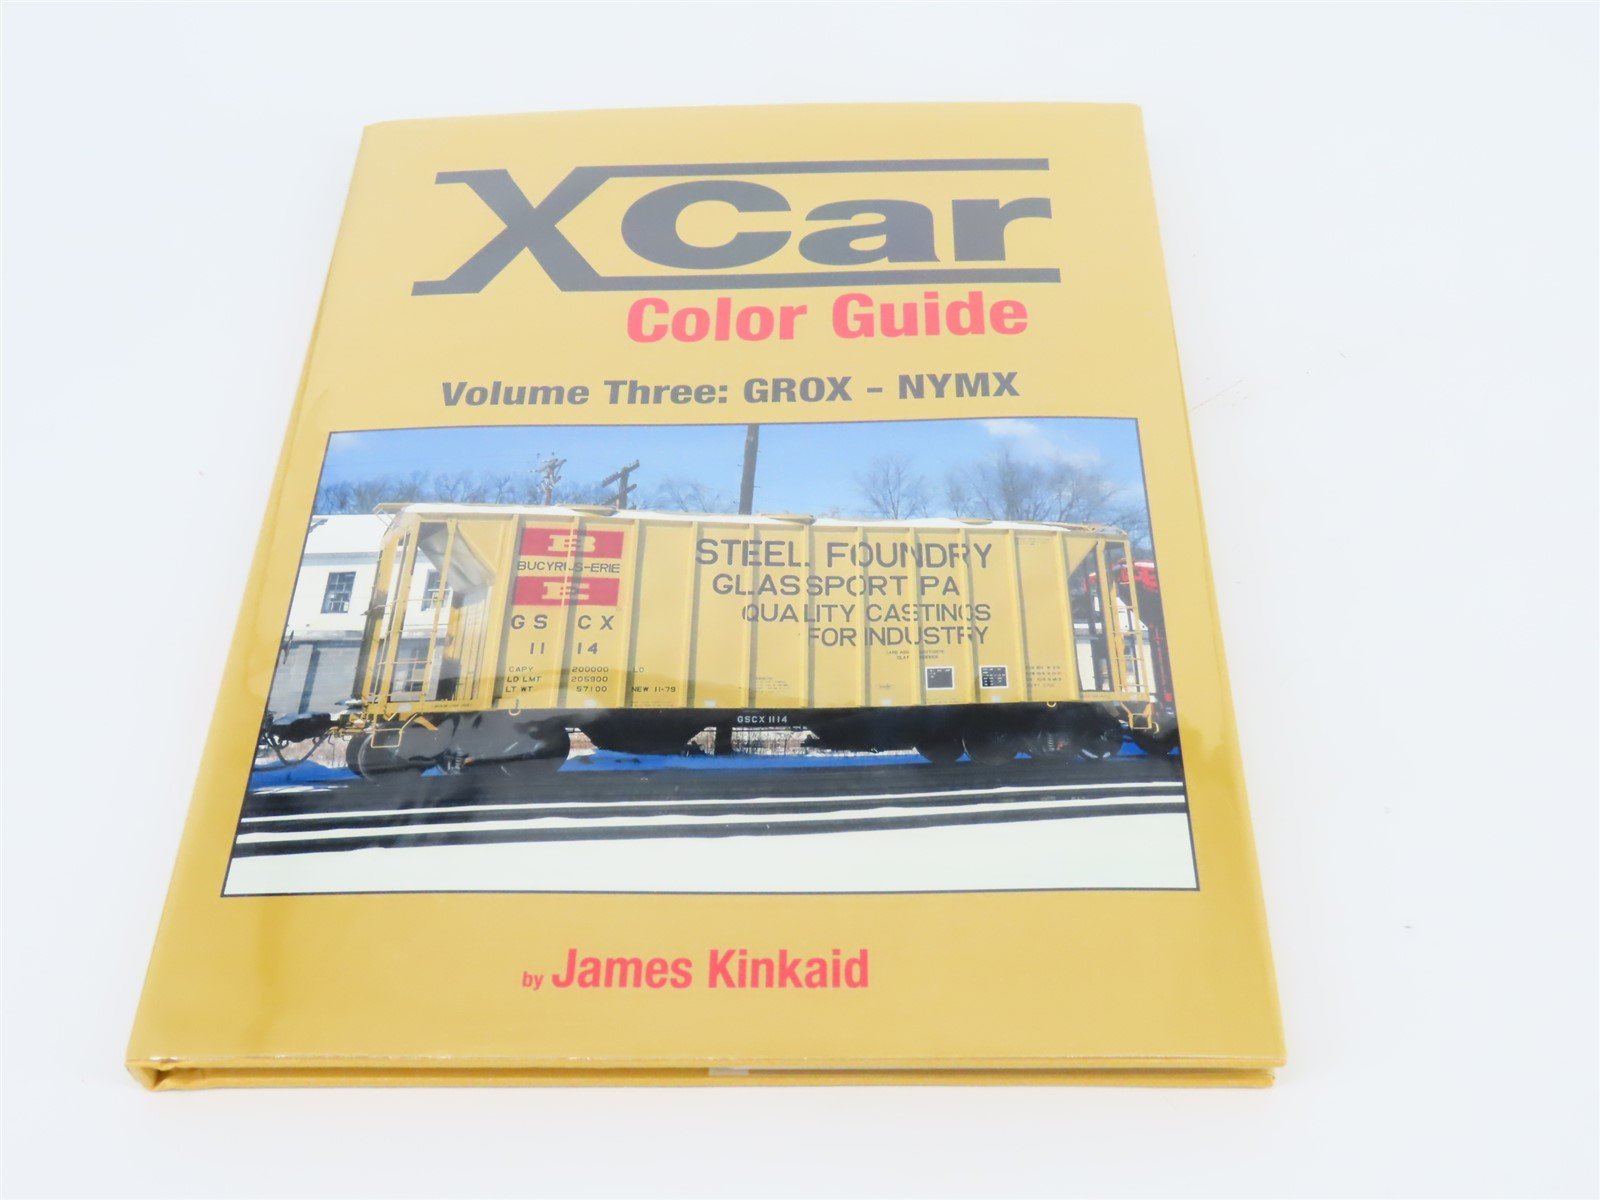 Morning Sun: XCar Color Guide Volume Three: GROX-NYMX by James Kinkaid ©2016 HC